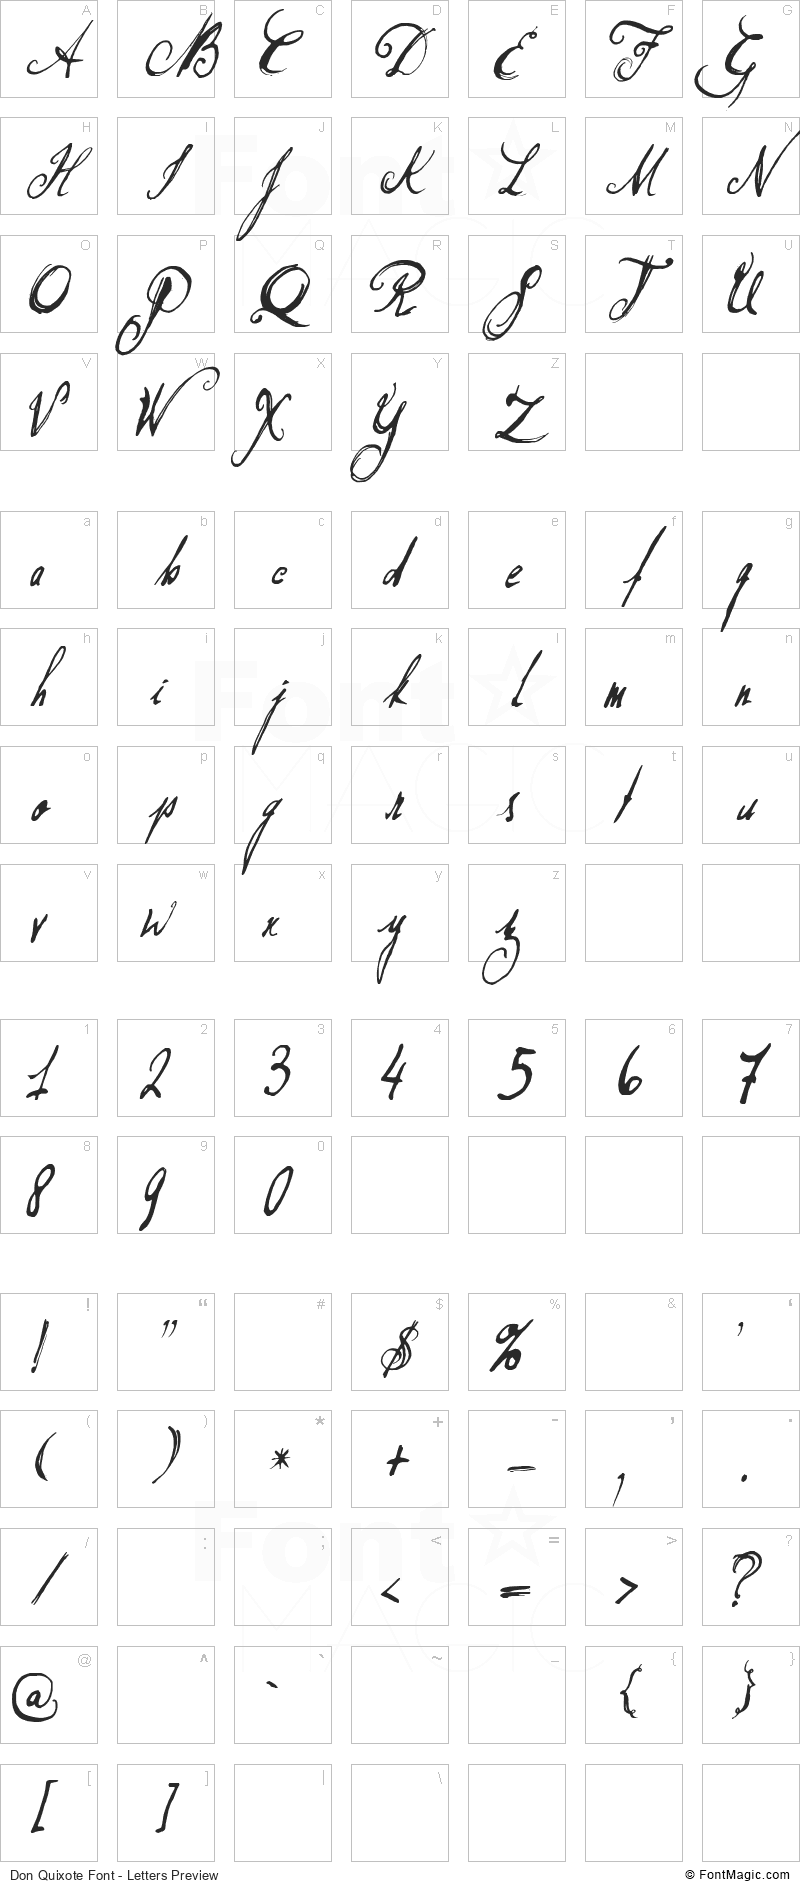 Don Quixote Font - All Latters Preview Chart